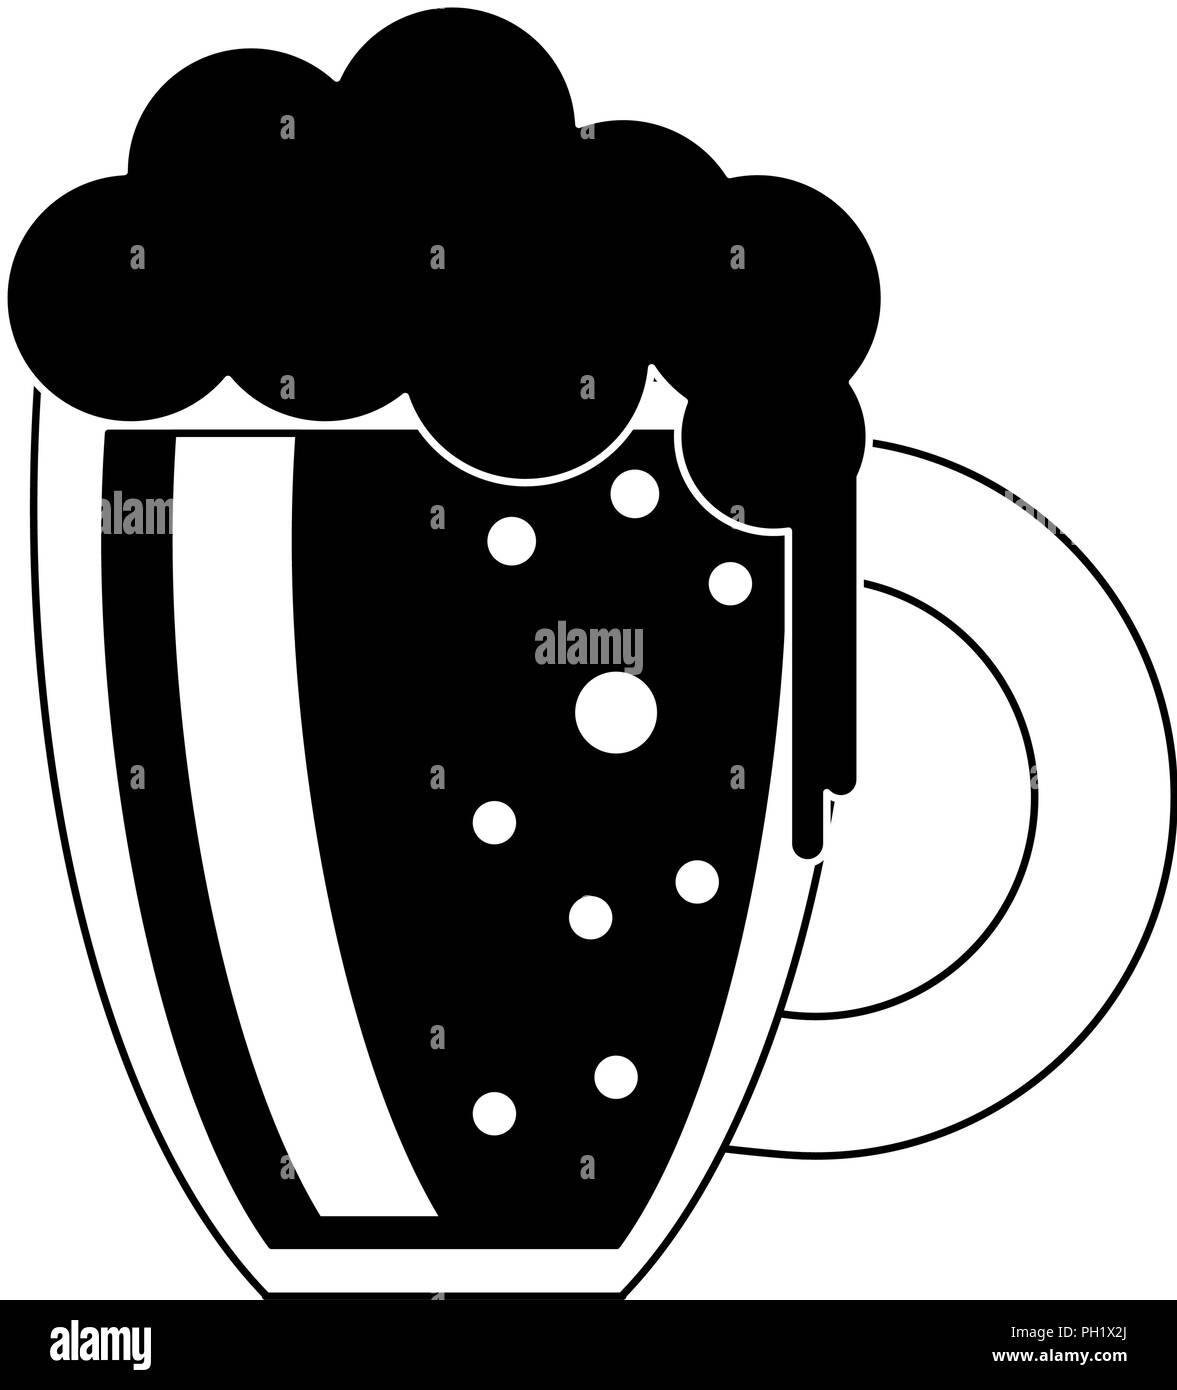 Irish beer cup in black and white Stock Vector